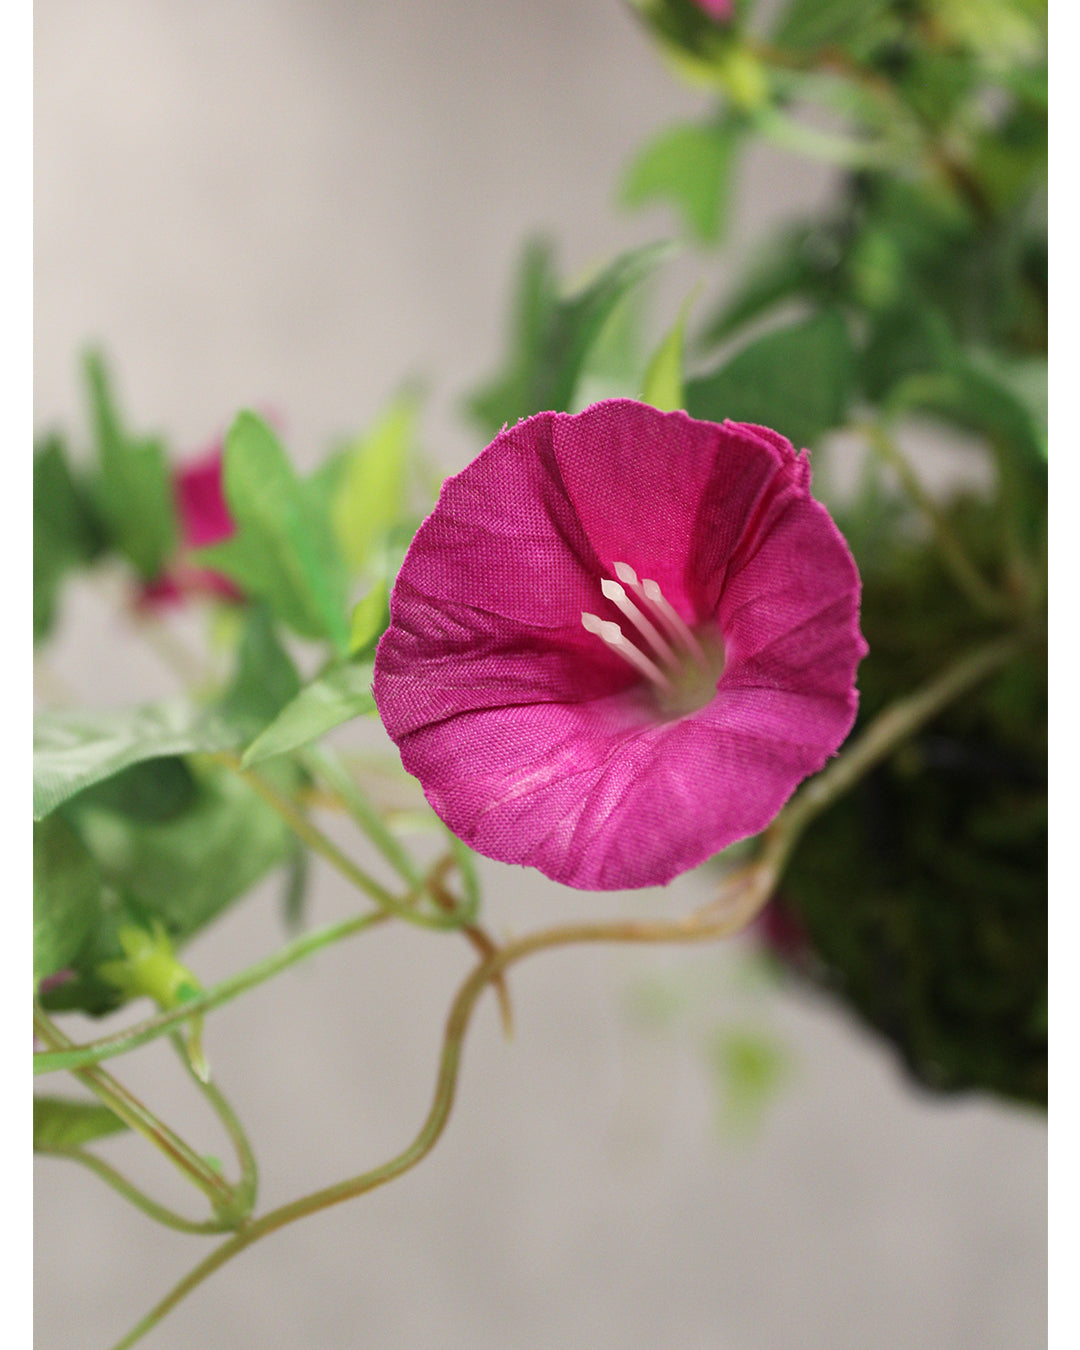 PolliNation Artificial Hanging Flower Purple Morning Glory Creeper with Hanging Metal Stand for Balcony Garden Decoration (Pack of 1, 40 cm)